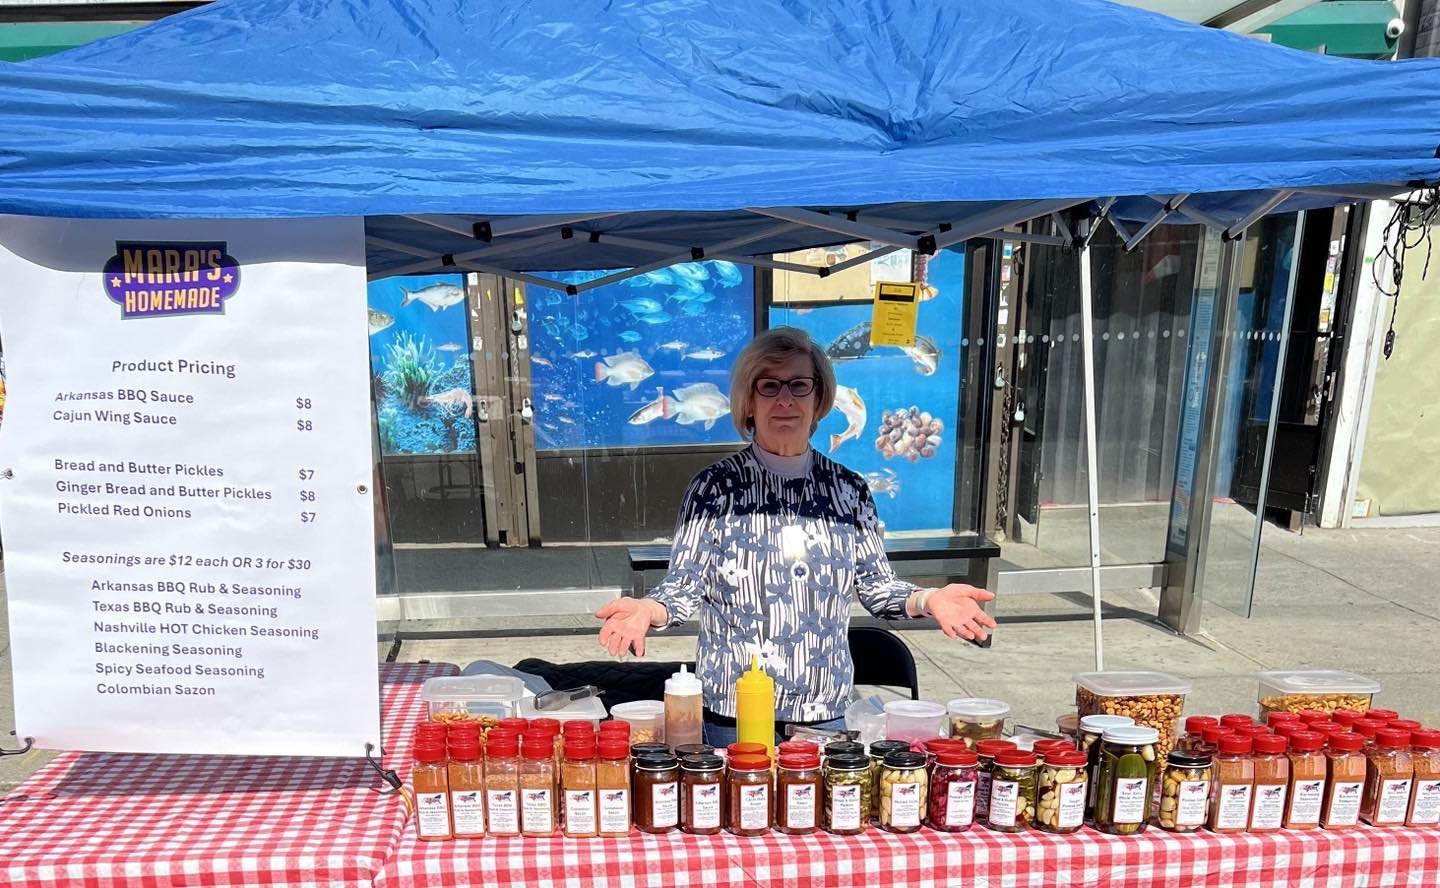 Today we are in @RegoPark on 63rd Drive  and Booth Street. #Seasonings #BBQsauce #WingSauce 3 different #pickles #pickled #onions and #garlic #tickleyourtastebuds add new #flavor to your food! #seeyousoon